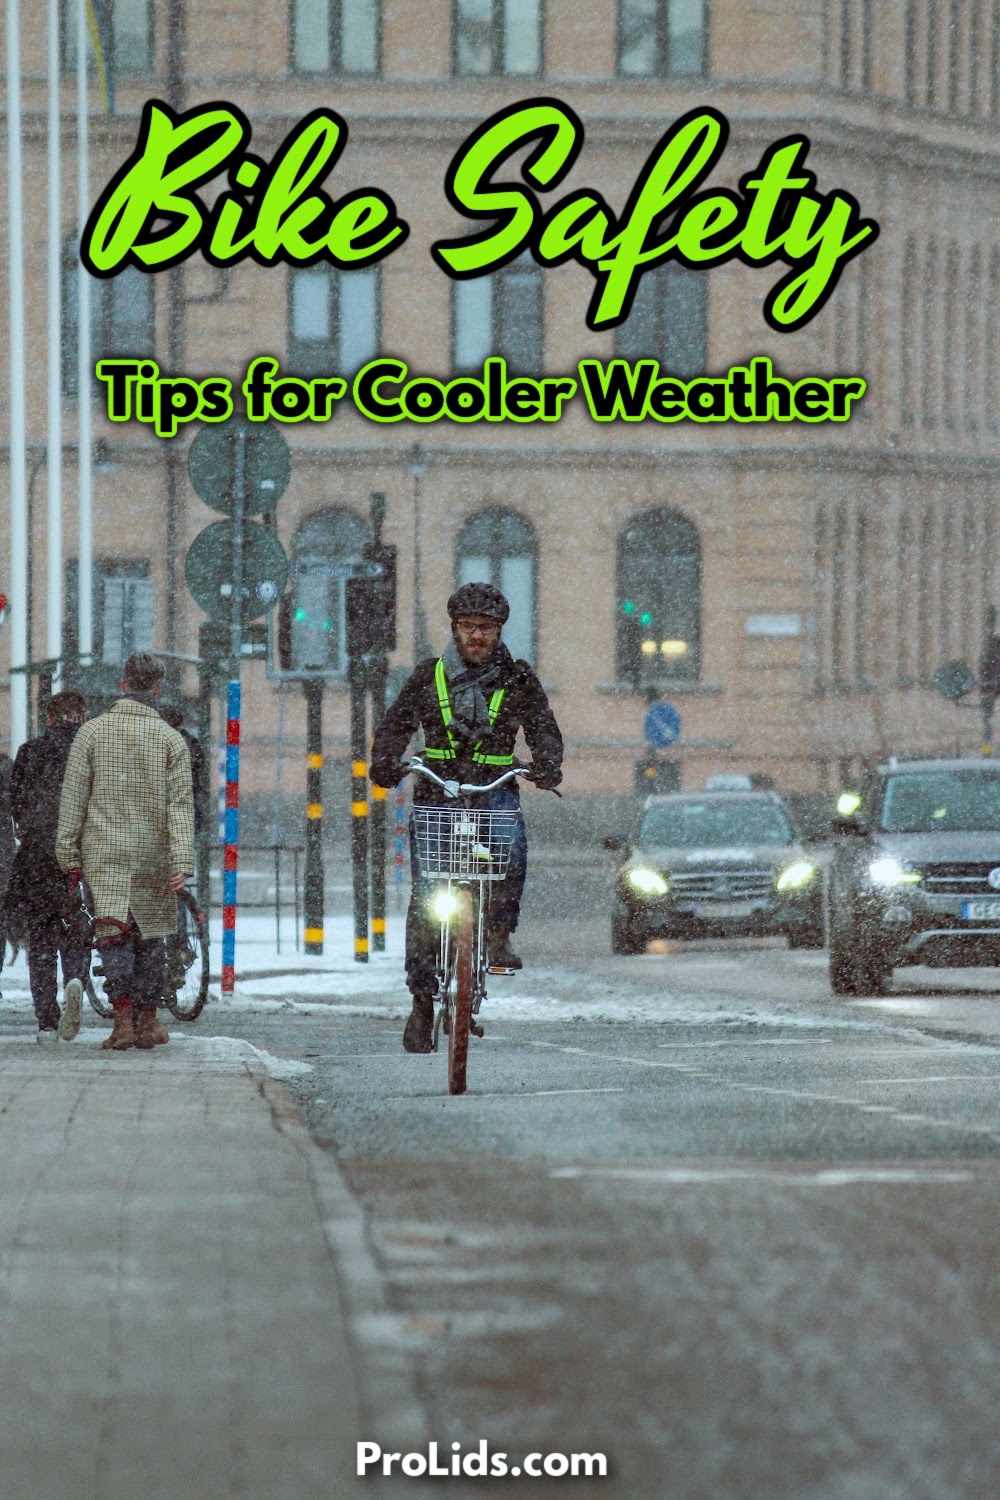 Bike safety tips for cooler weather can help us all enjoy our bikes year-round, even when things get more than chilly.